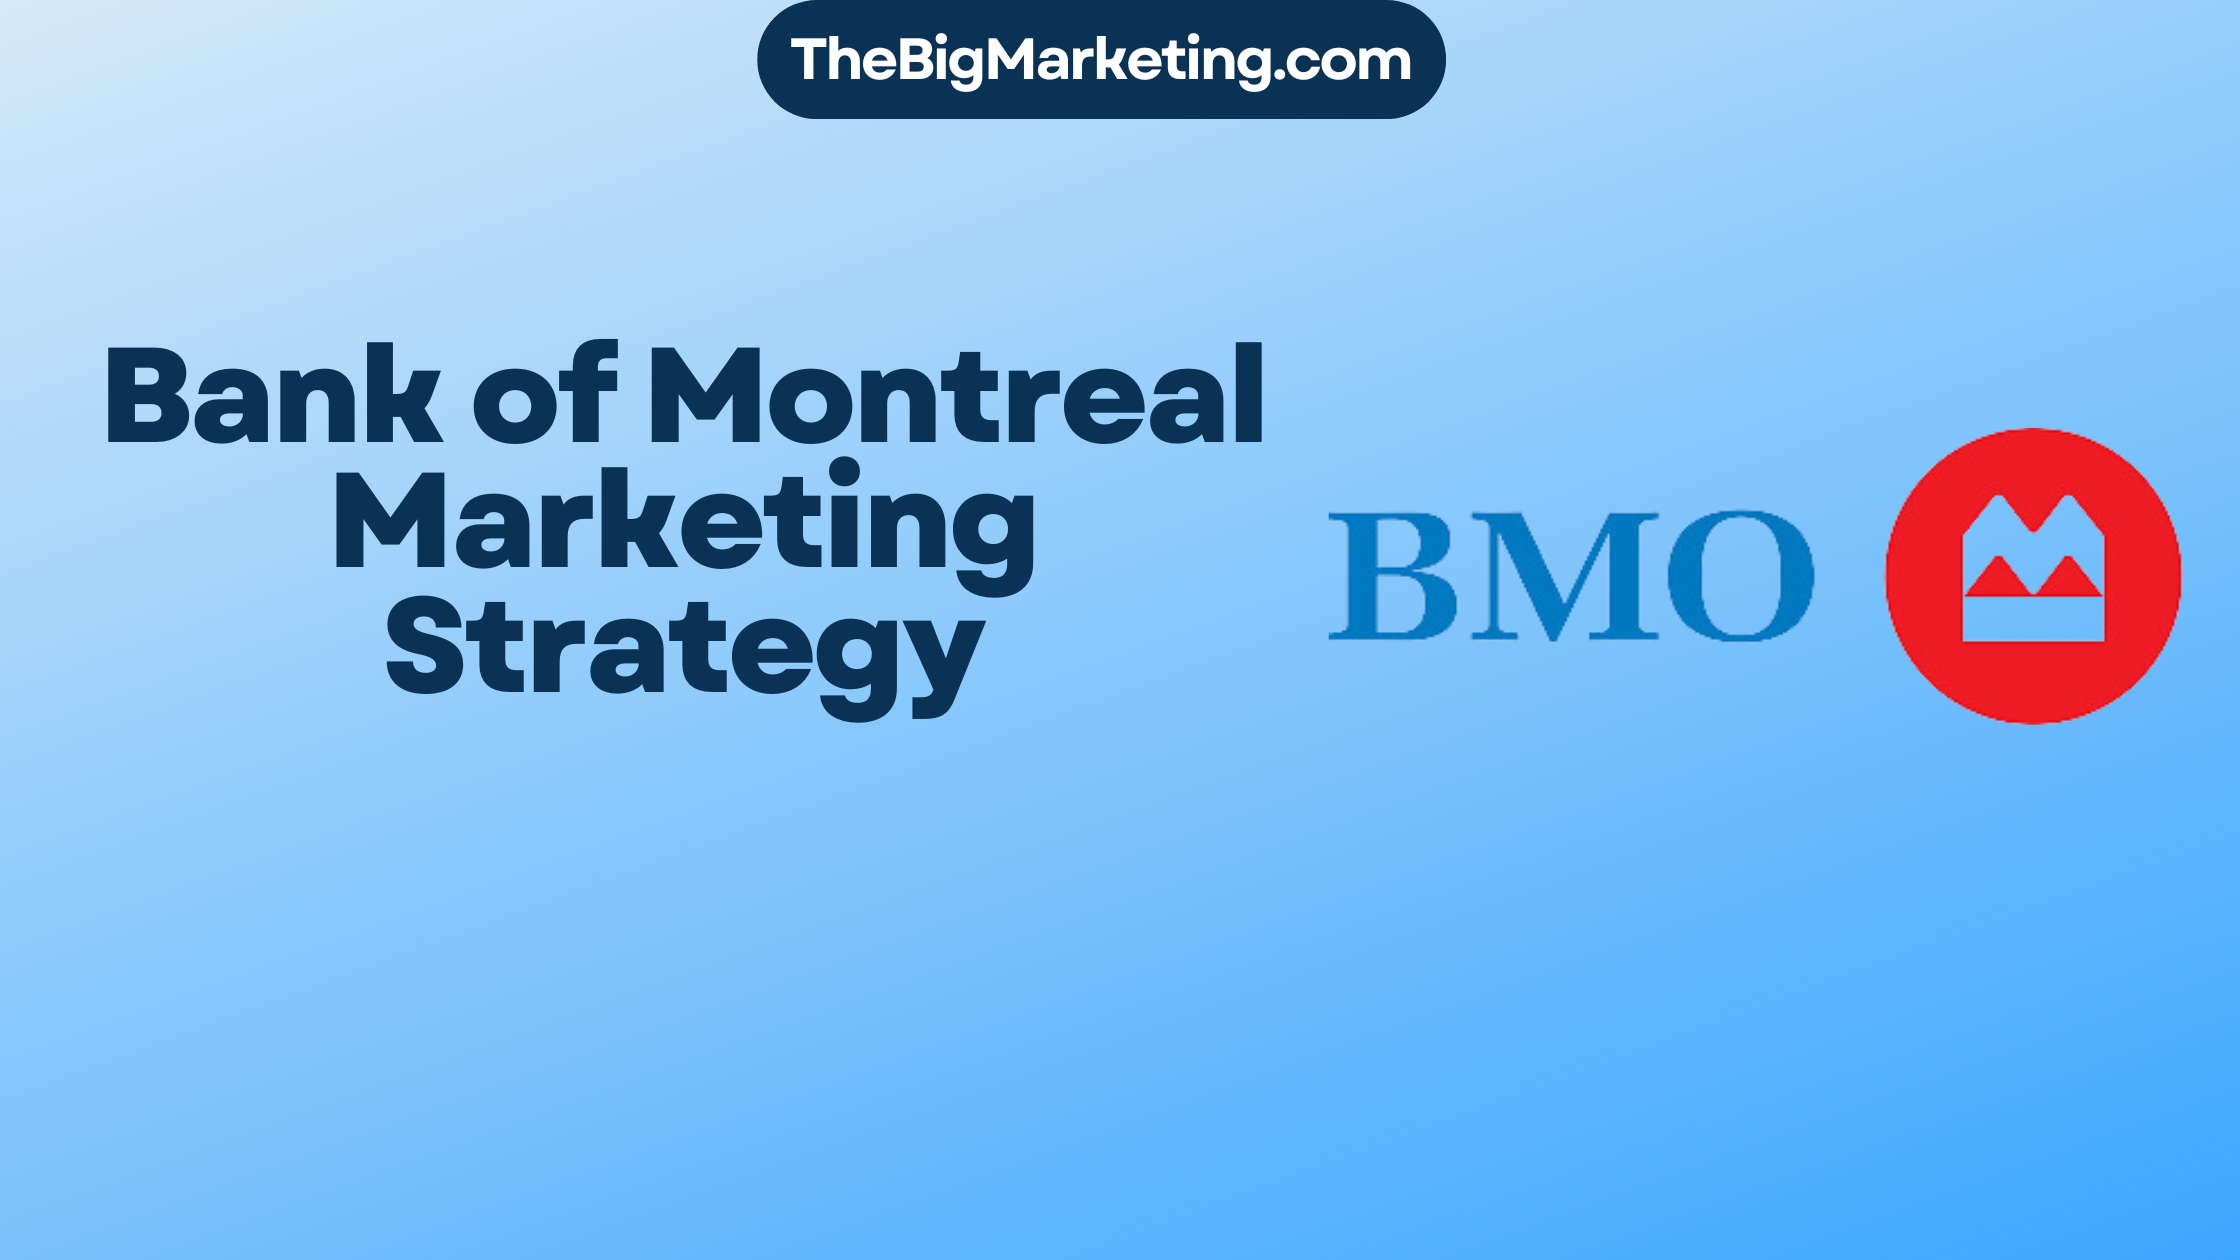 Bank of Montreal Marketing Strategy